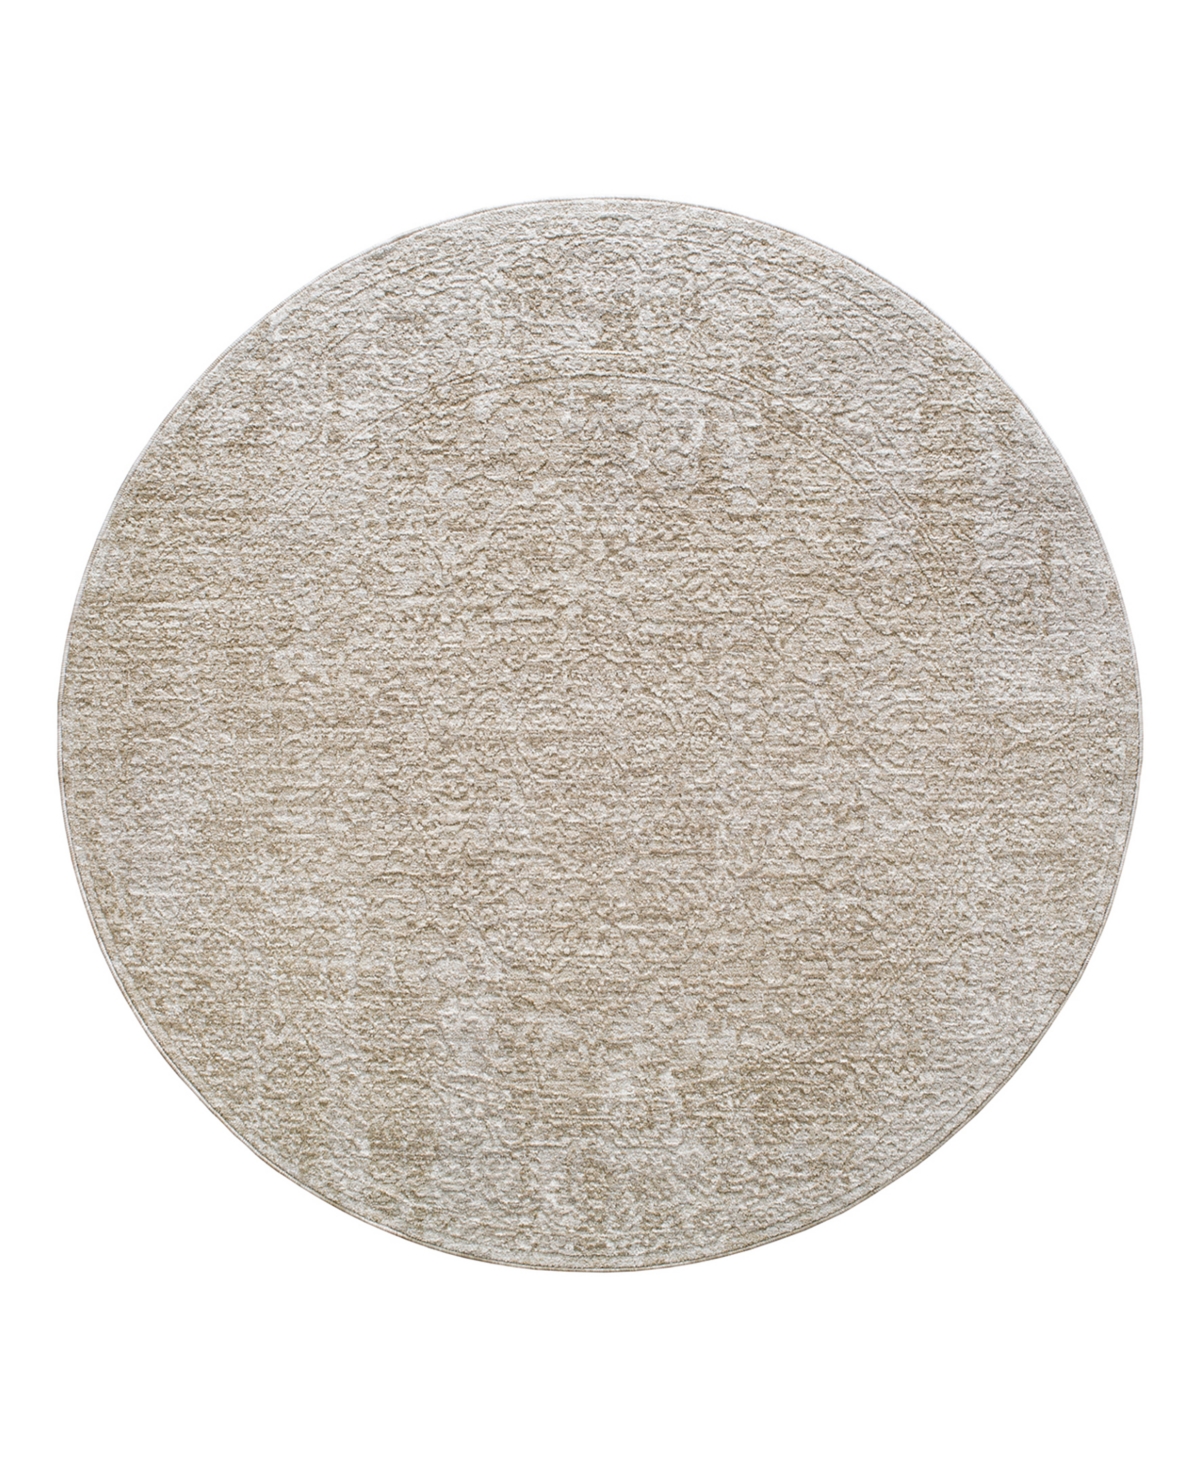 Surya Masterpiece High-Low Mpc-2322 7'10in x 7'10in Round Area Rug - Taupe